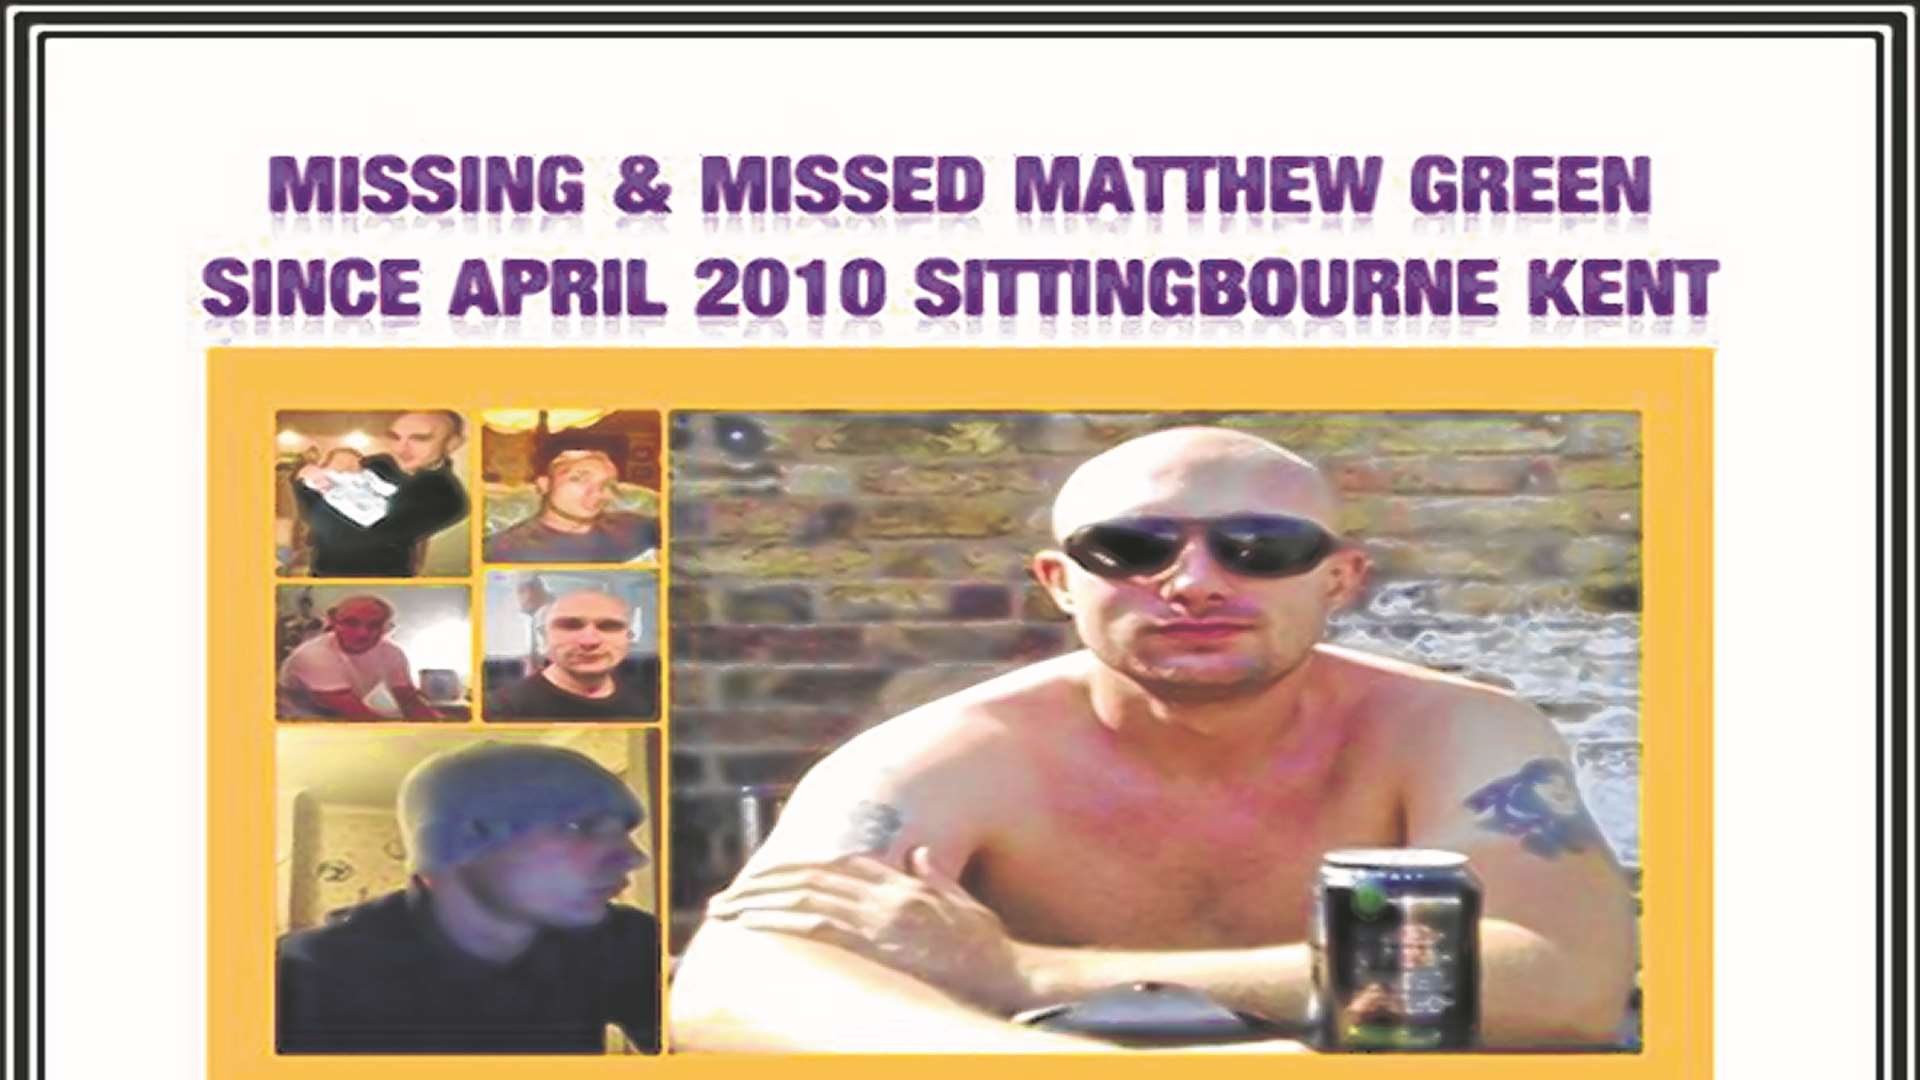 Posters showing the self-employed roofer and his tattoos were issued soon after his disappearance